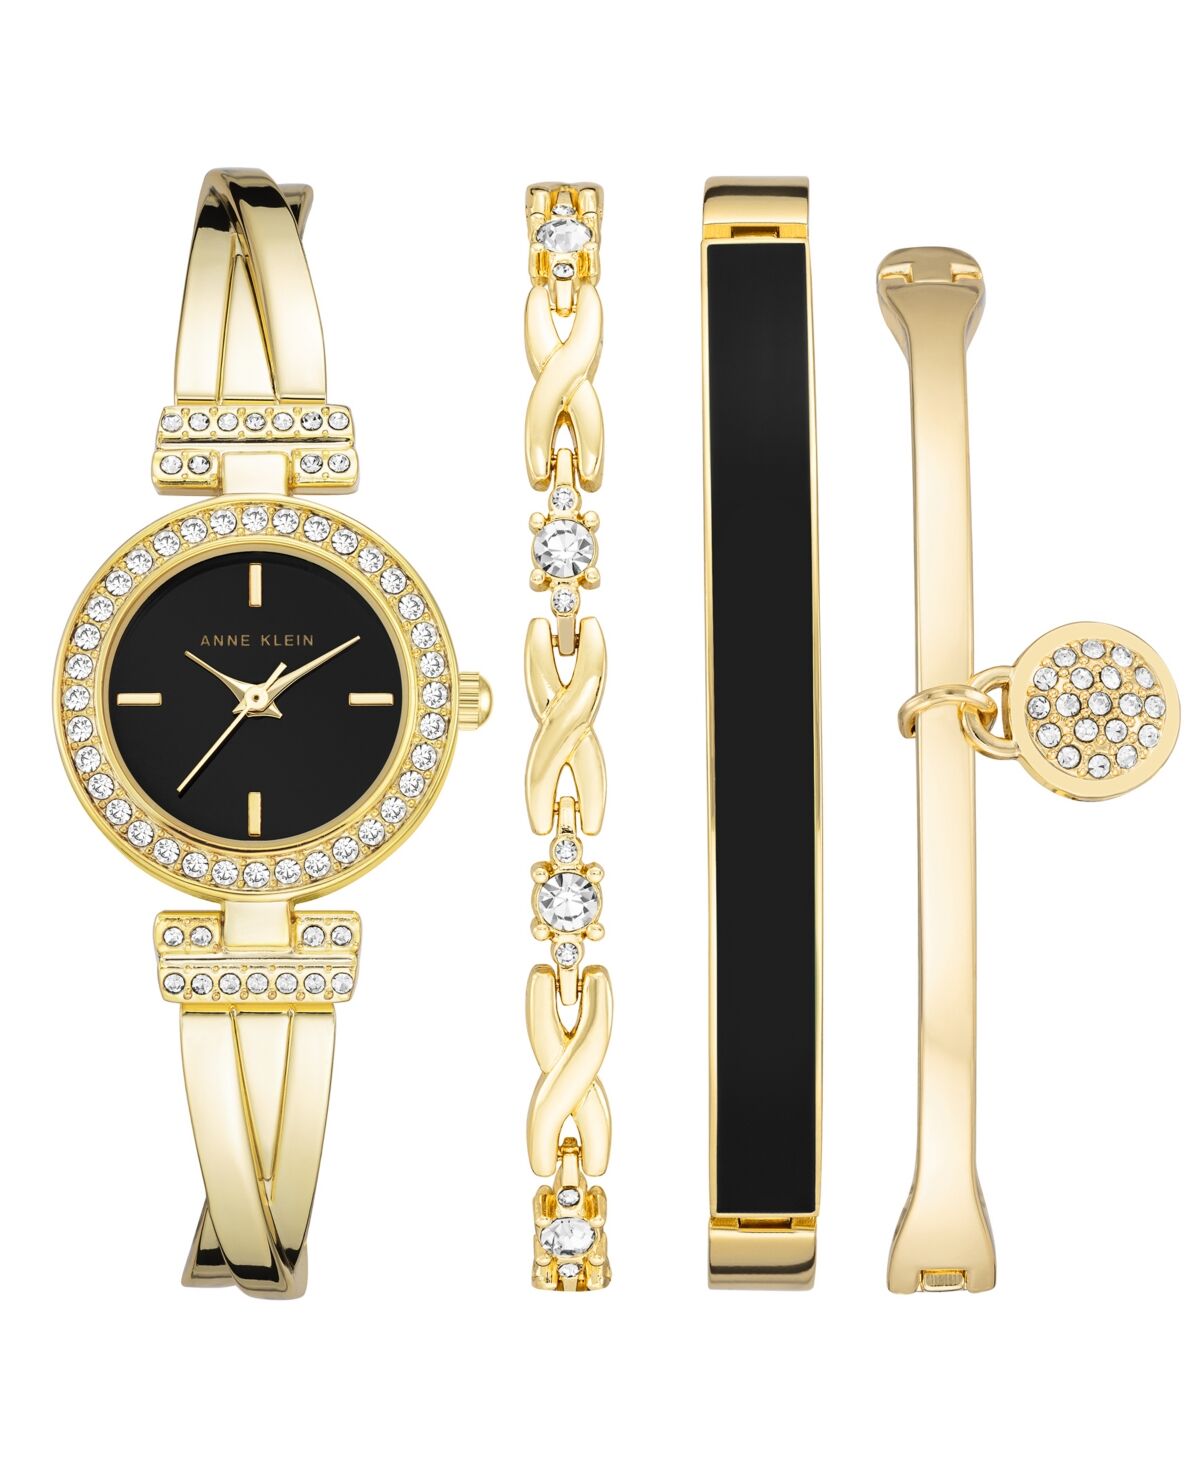 Anne Klein Women's Gold-Tone Alloy Bangle with Crystal Accents Fashion Watch 37mm Set 4 Pieces - Gold-Tone